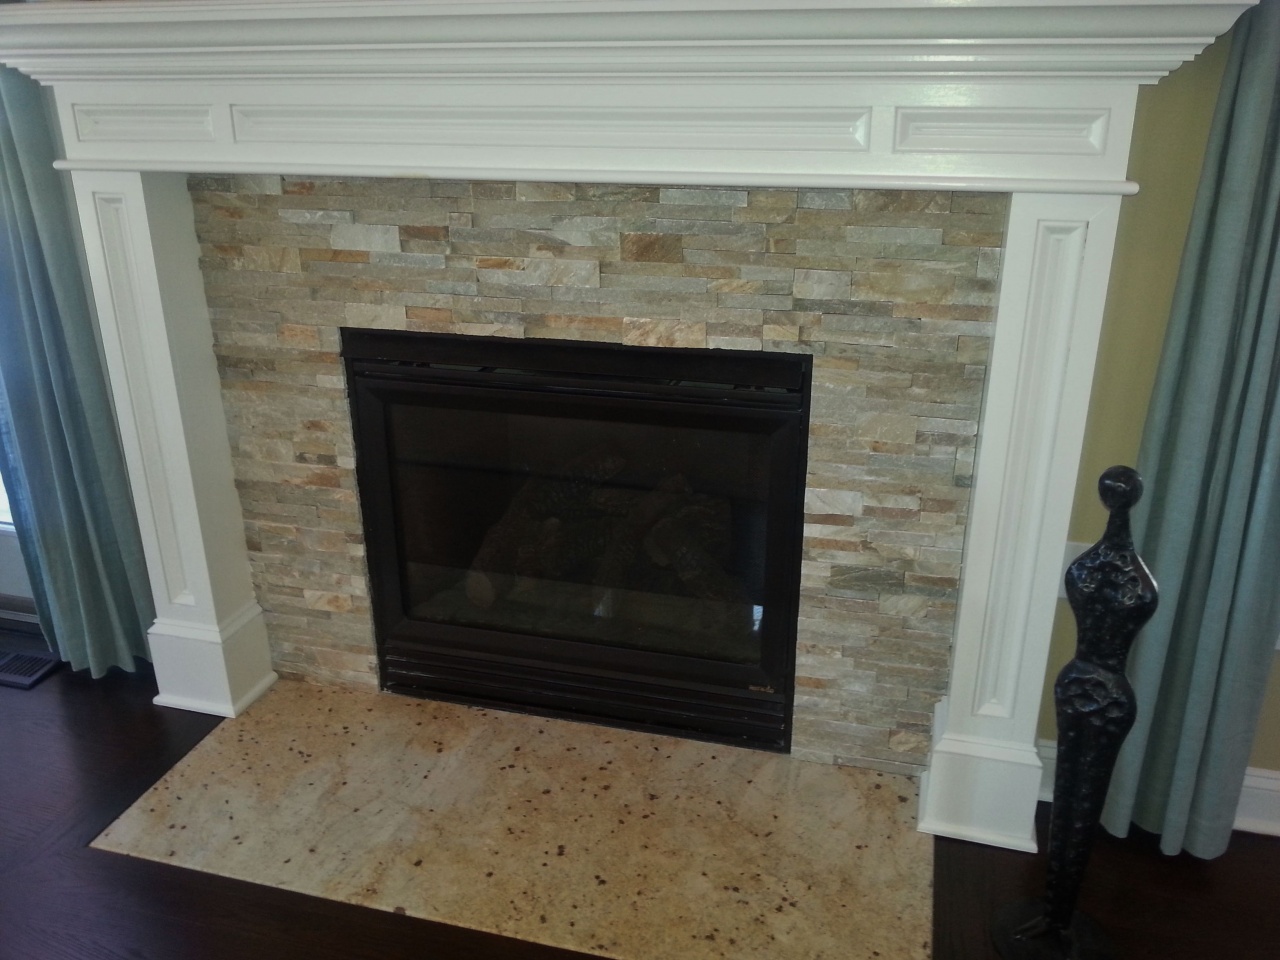 Tile Surround Fireplace Fresh How to Build A Fireplace Surround Over Brick – Fireplace